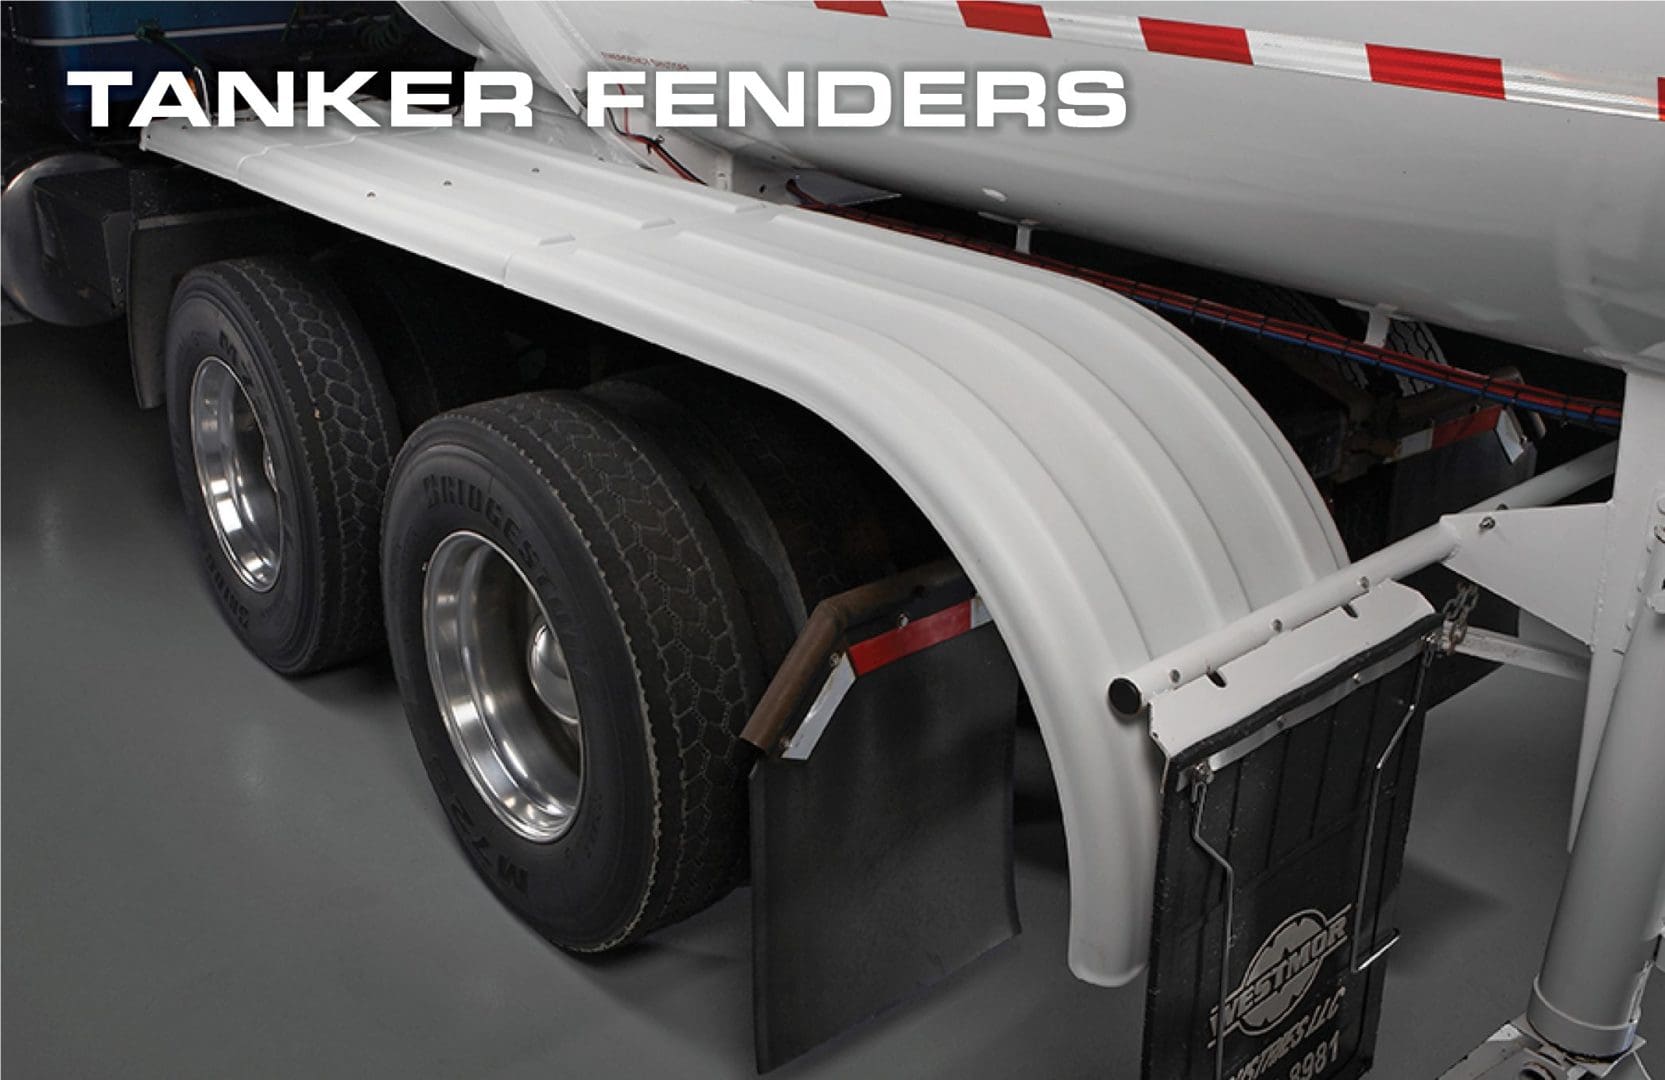 Minimizer - Silver mirror finish fenders are a super sharp addition to any  truck! Designed to look like stainless but with the durability of Minimizer!  #Trucking #SemiTrucks #Minimizer #Fenders